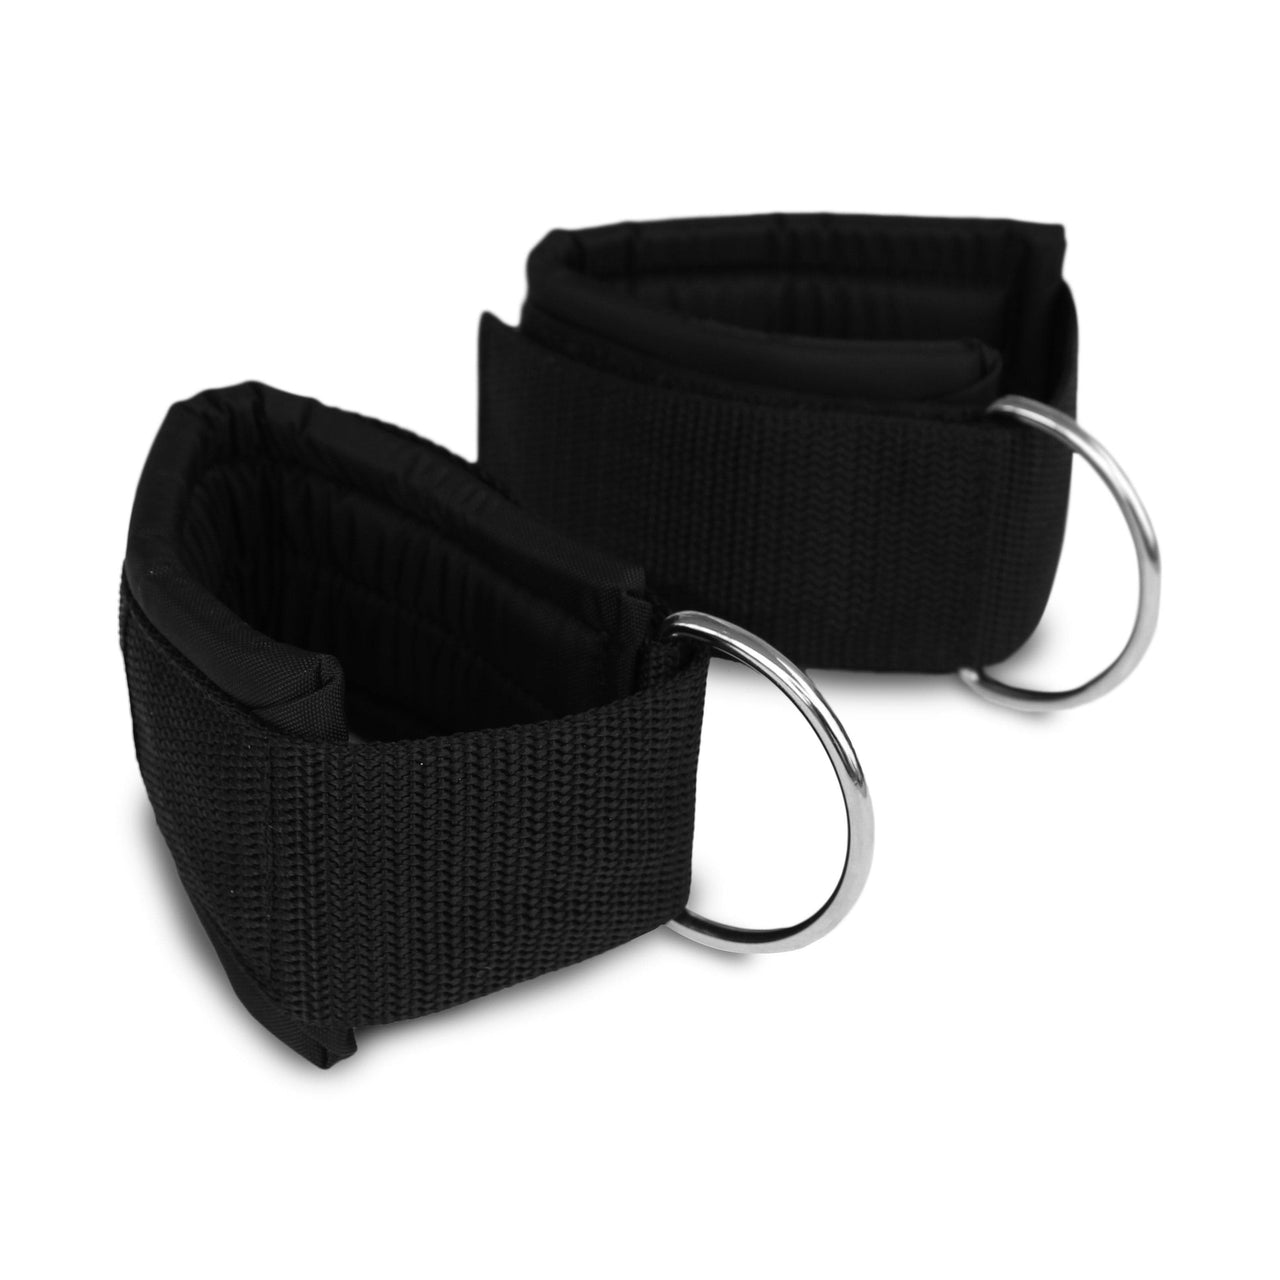 Padded American Made Fitness Training Cuffs for Resistance Bands with D-Ring and velcro